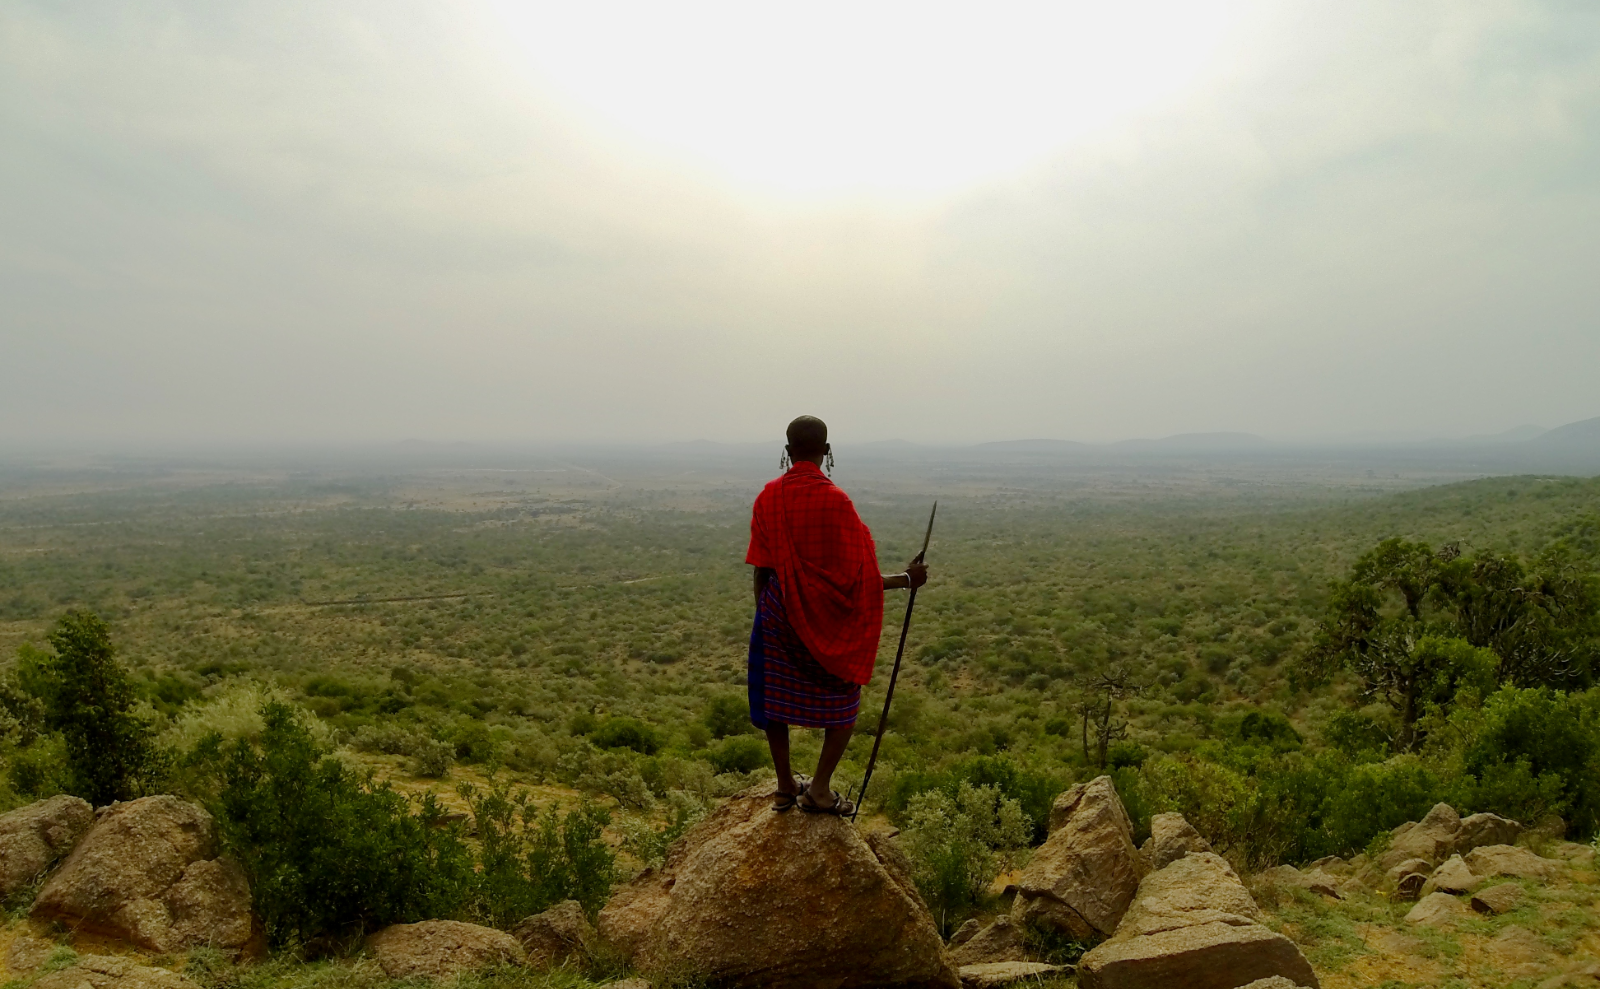 masai warrior in a red cloth cape and holding a walking stick standing on a rock outcropping and looking out over a landscape of green plants